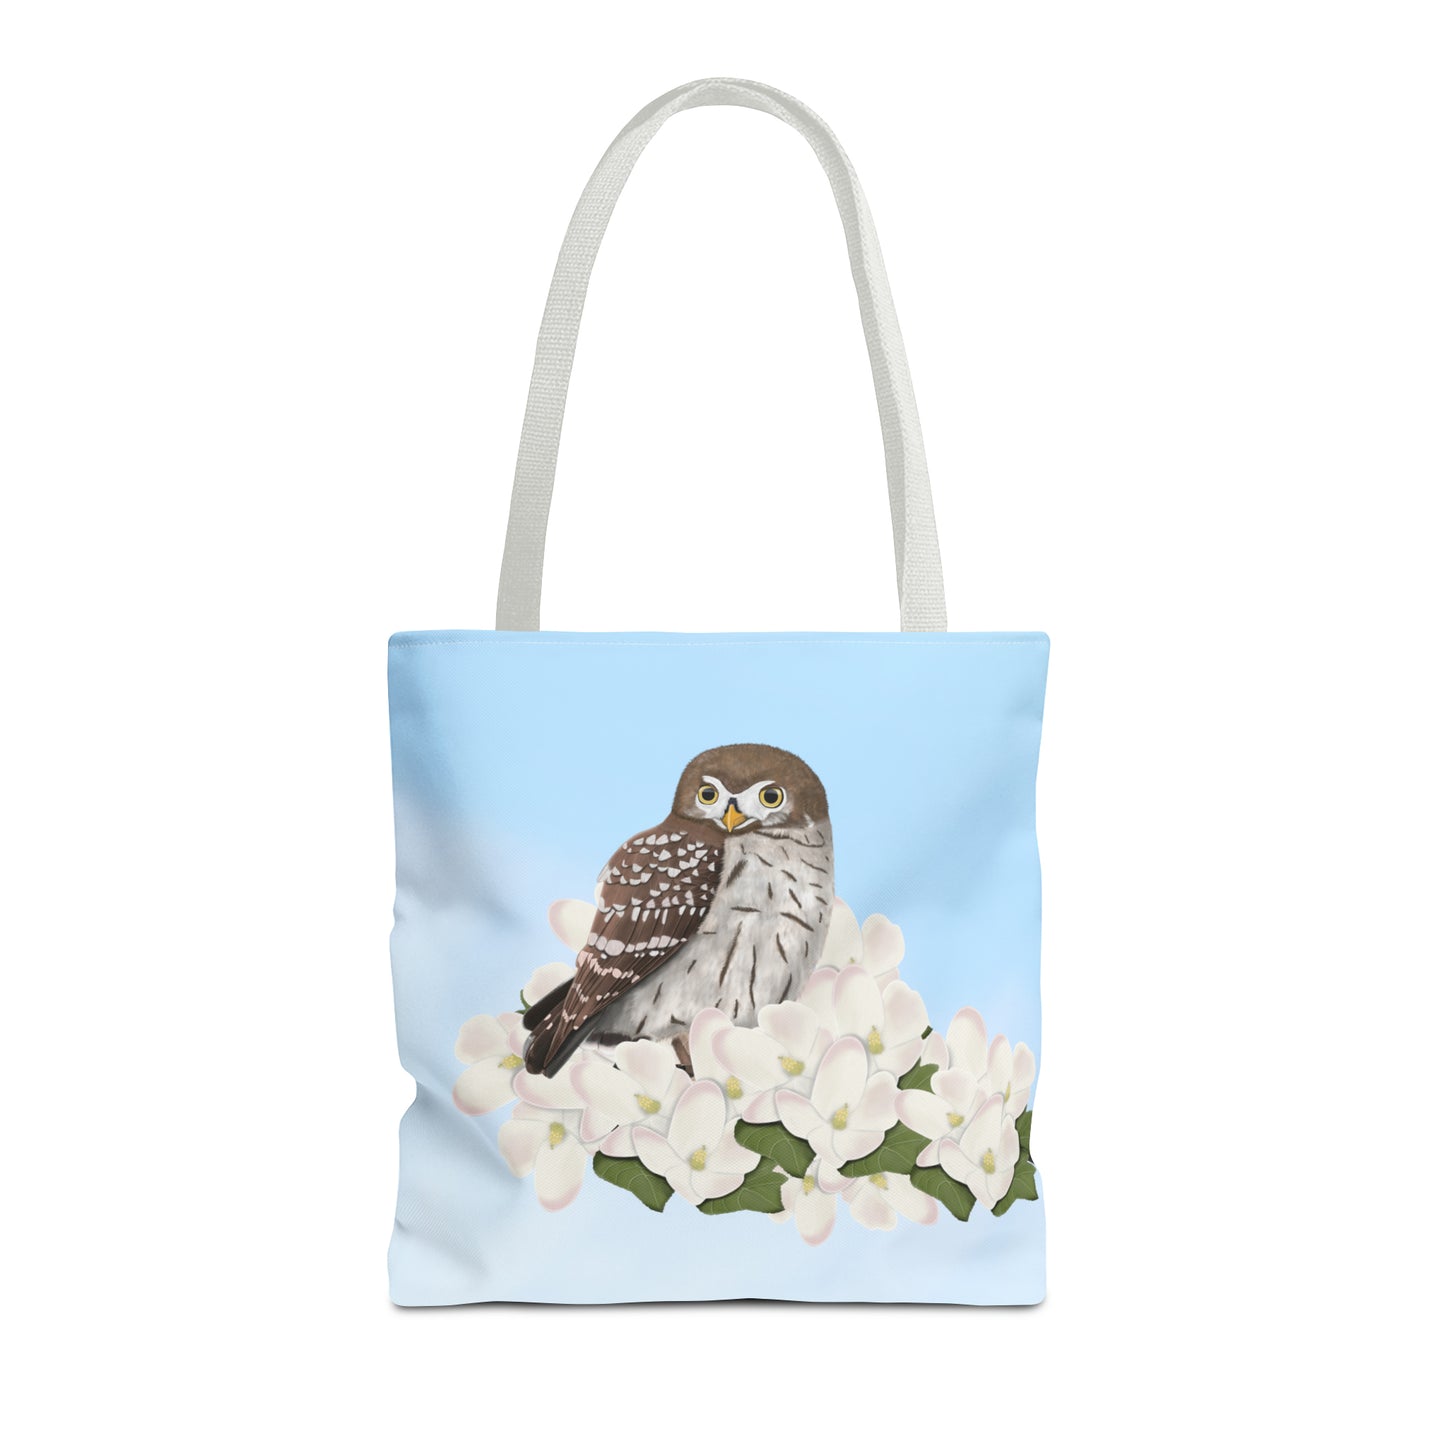 Little Owl in Spring Blossoms Bird Tote Bag 16"x16"